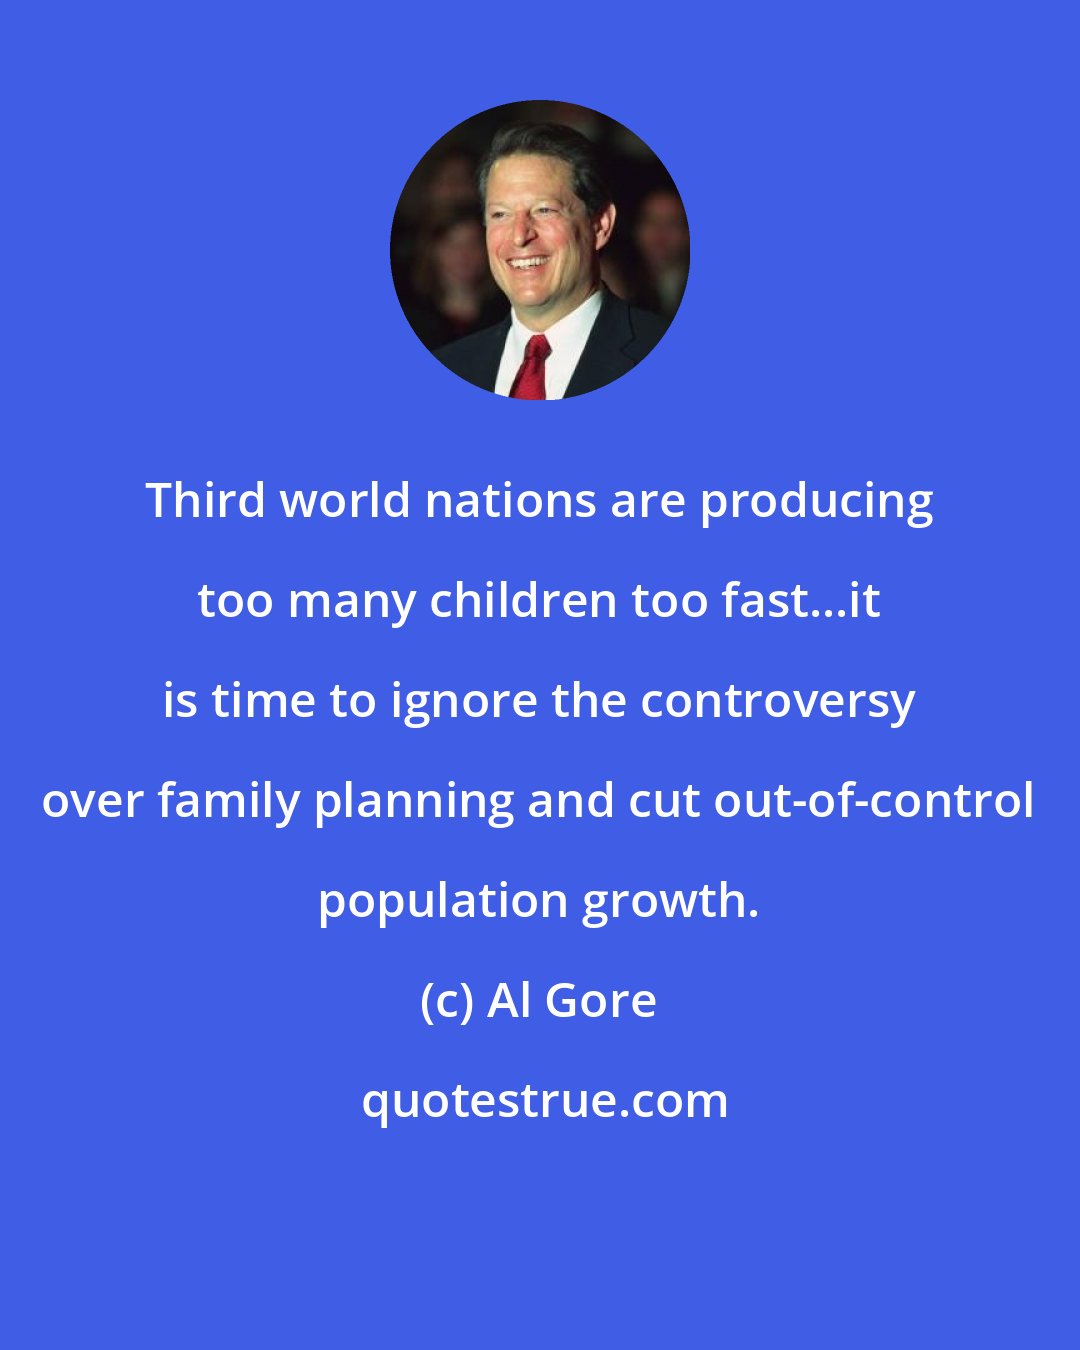 Al Gore: Third world nations are producing too many children too fast...it is time to ignore the controversy over family planning and cut out-of-control population growth.